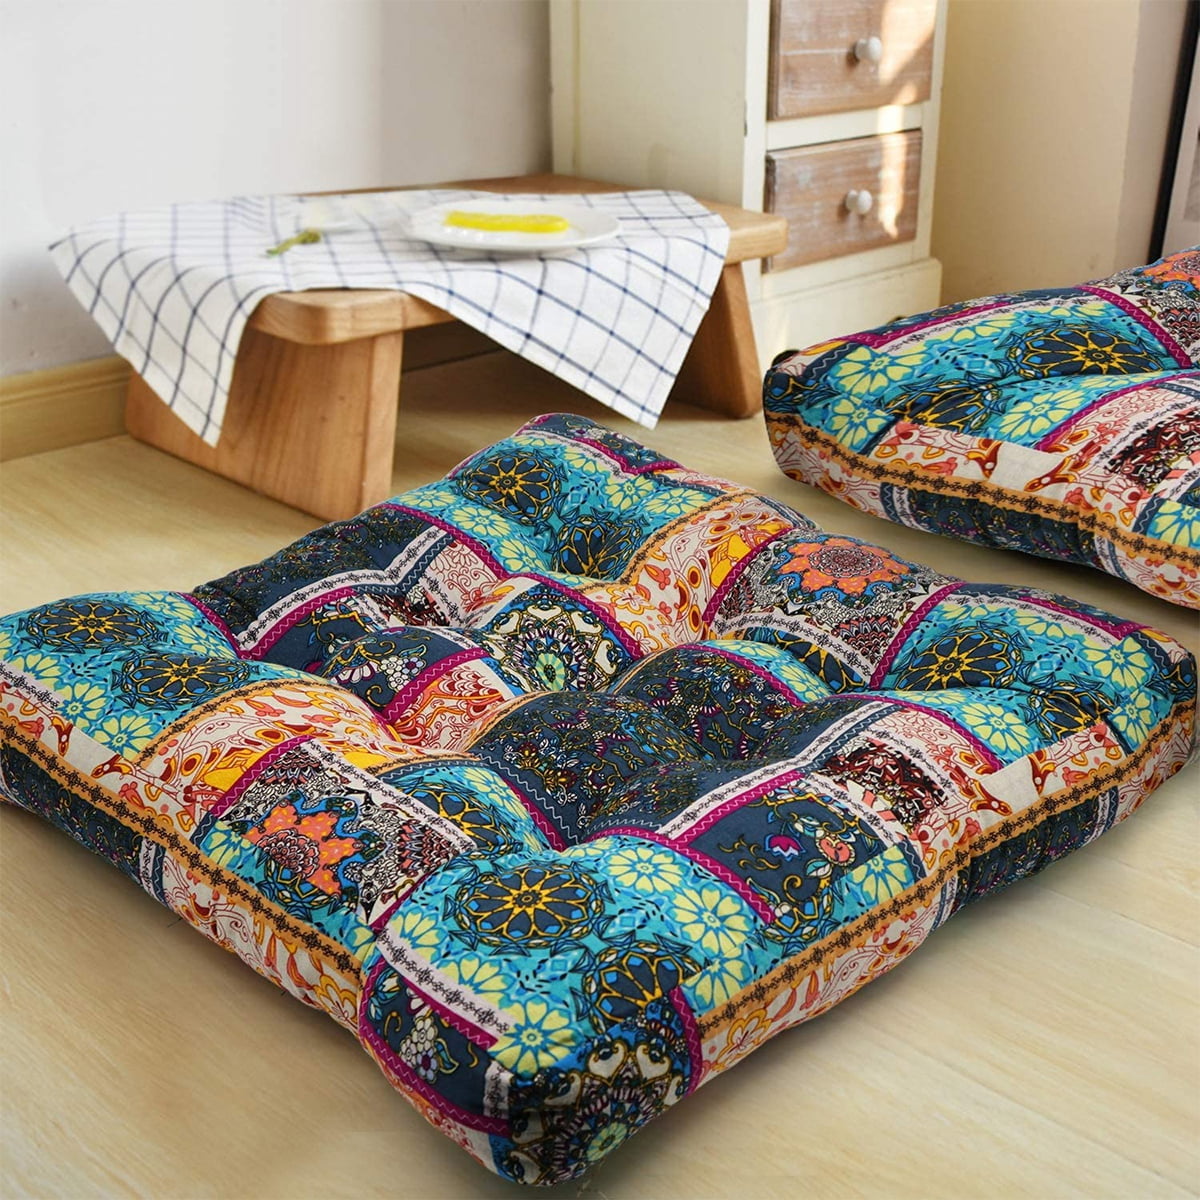 Home Thickened Seat Pillow Upholstery Floor Yoga Chair Seat Mat Tatami Cushion K 